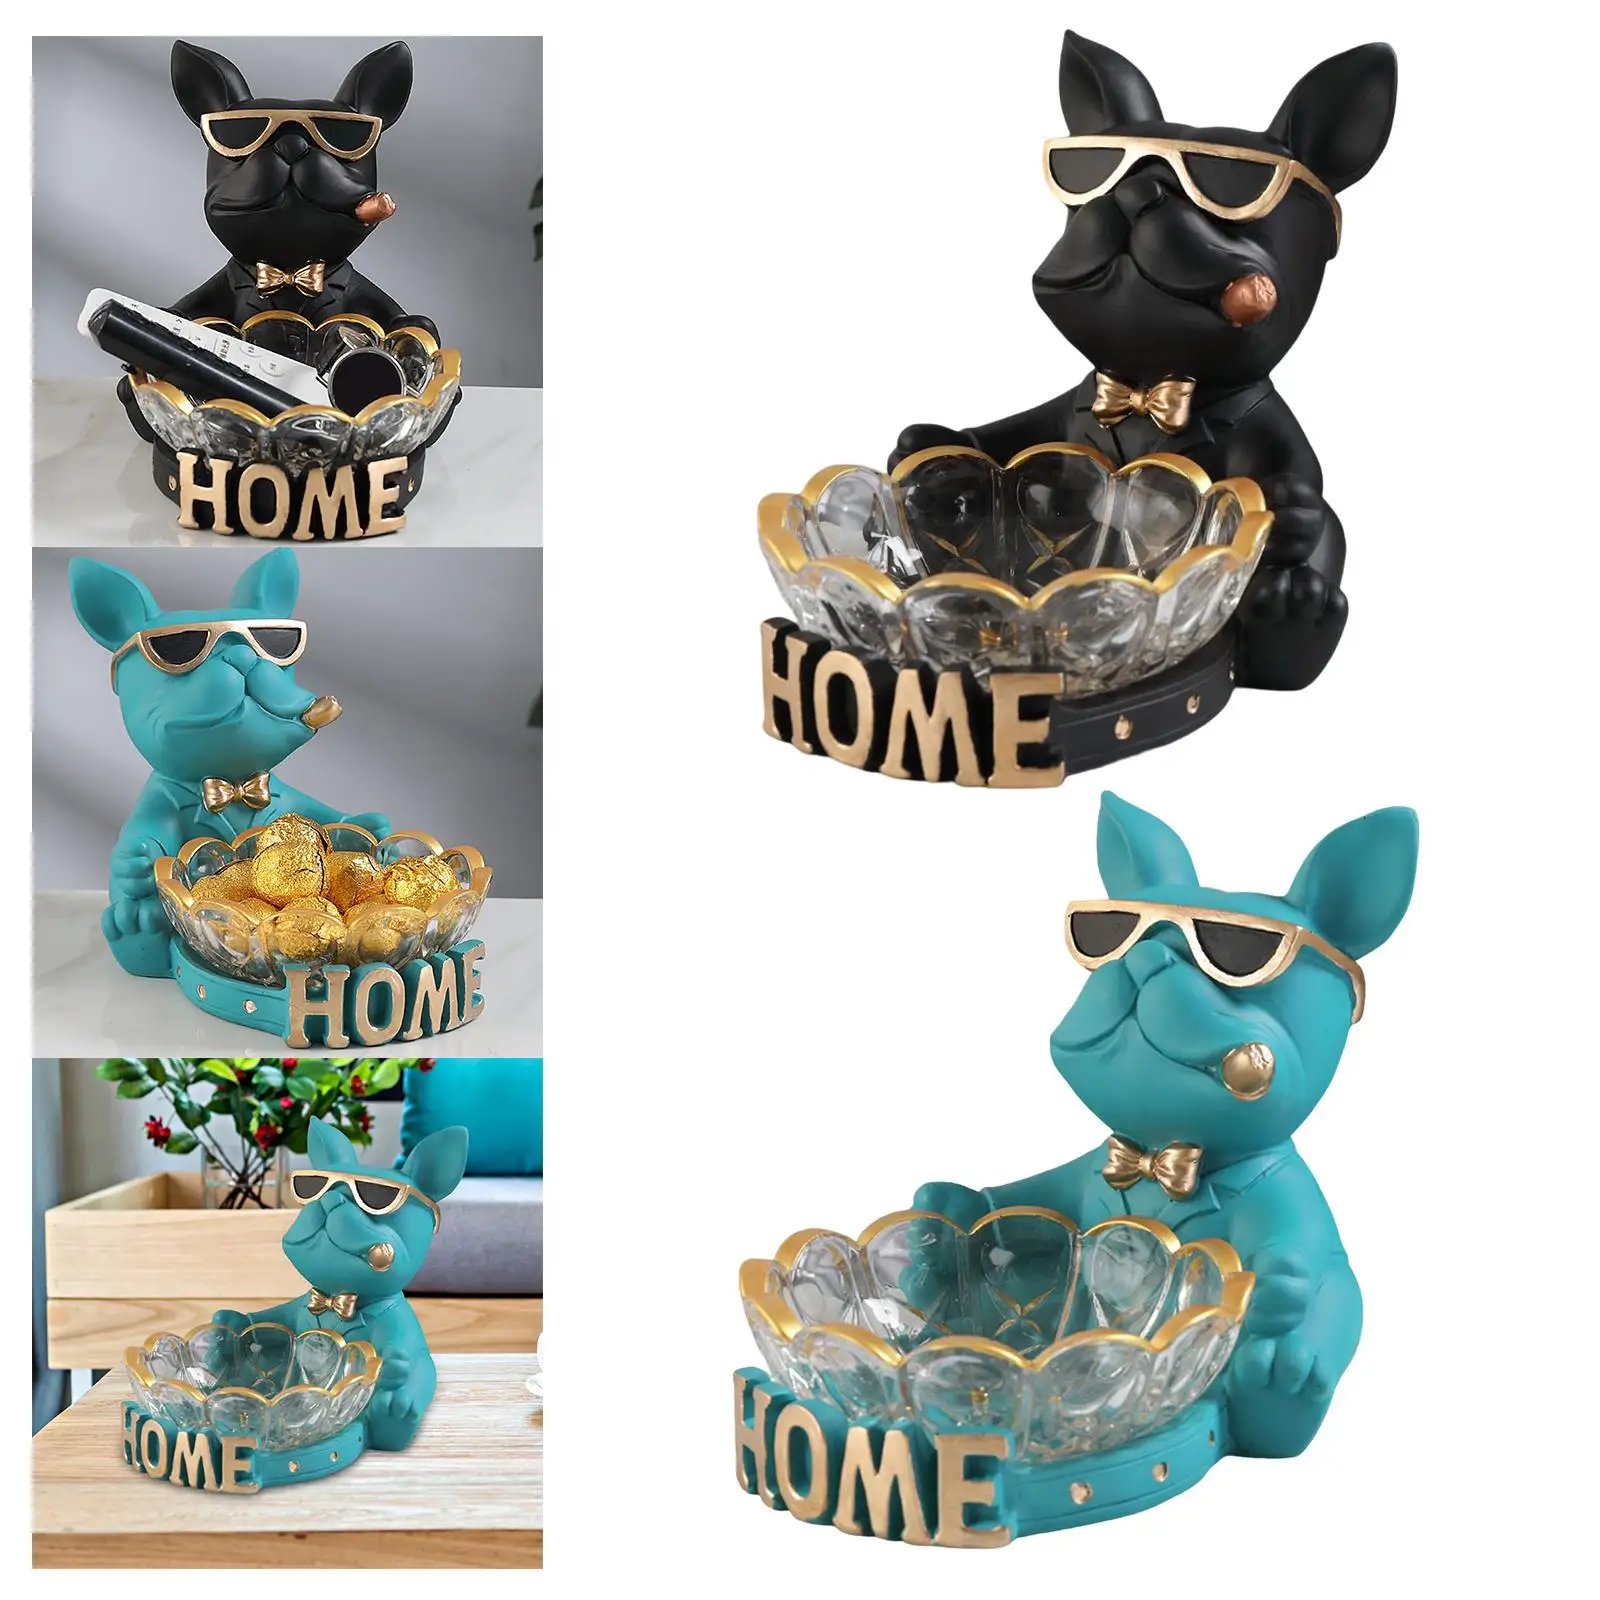 Novelty Dog Statue Figurine  Box Sundries Key Collectible Animal Sculpture  for   top Decoration Ornament